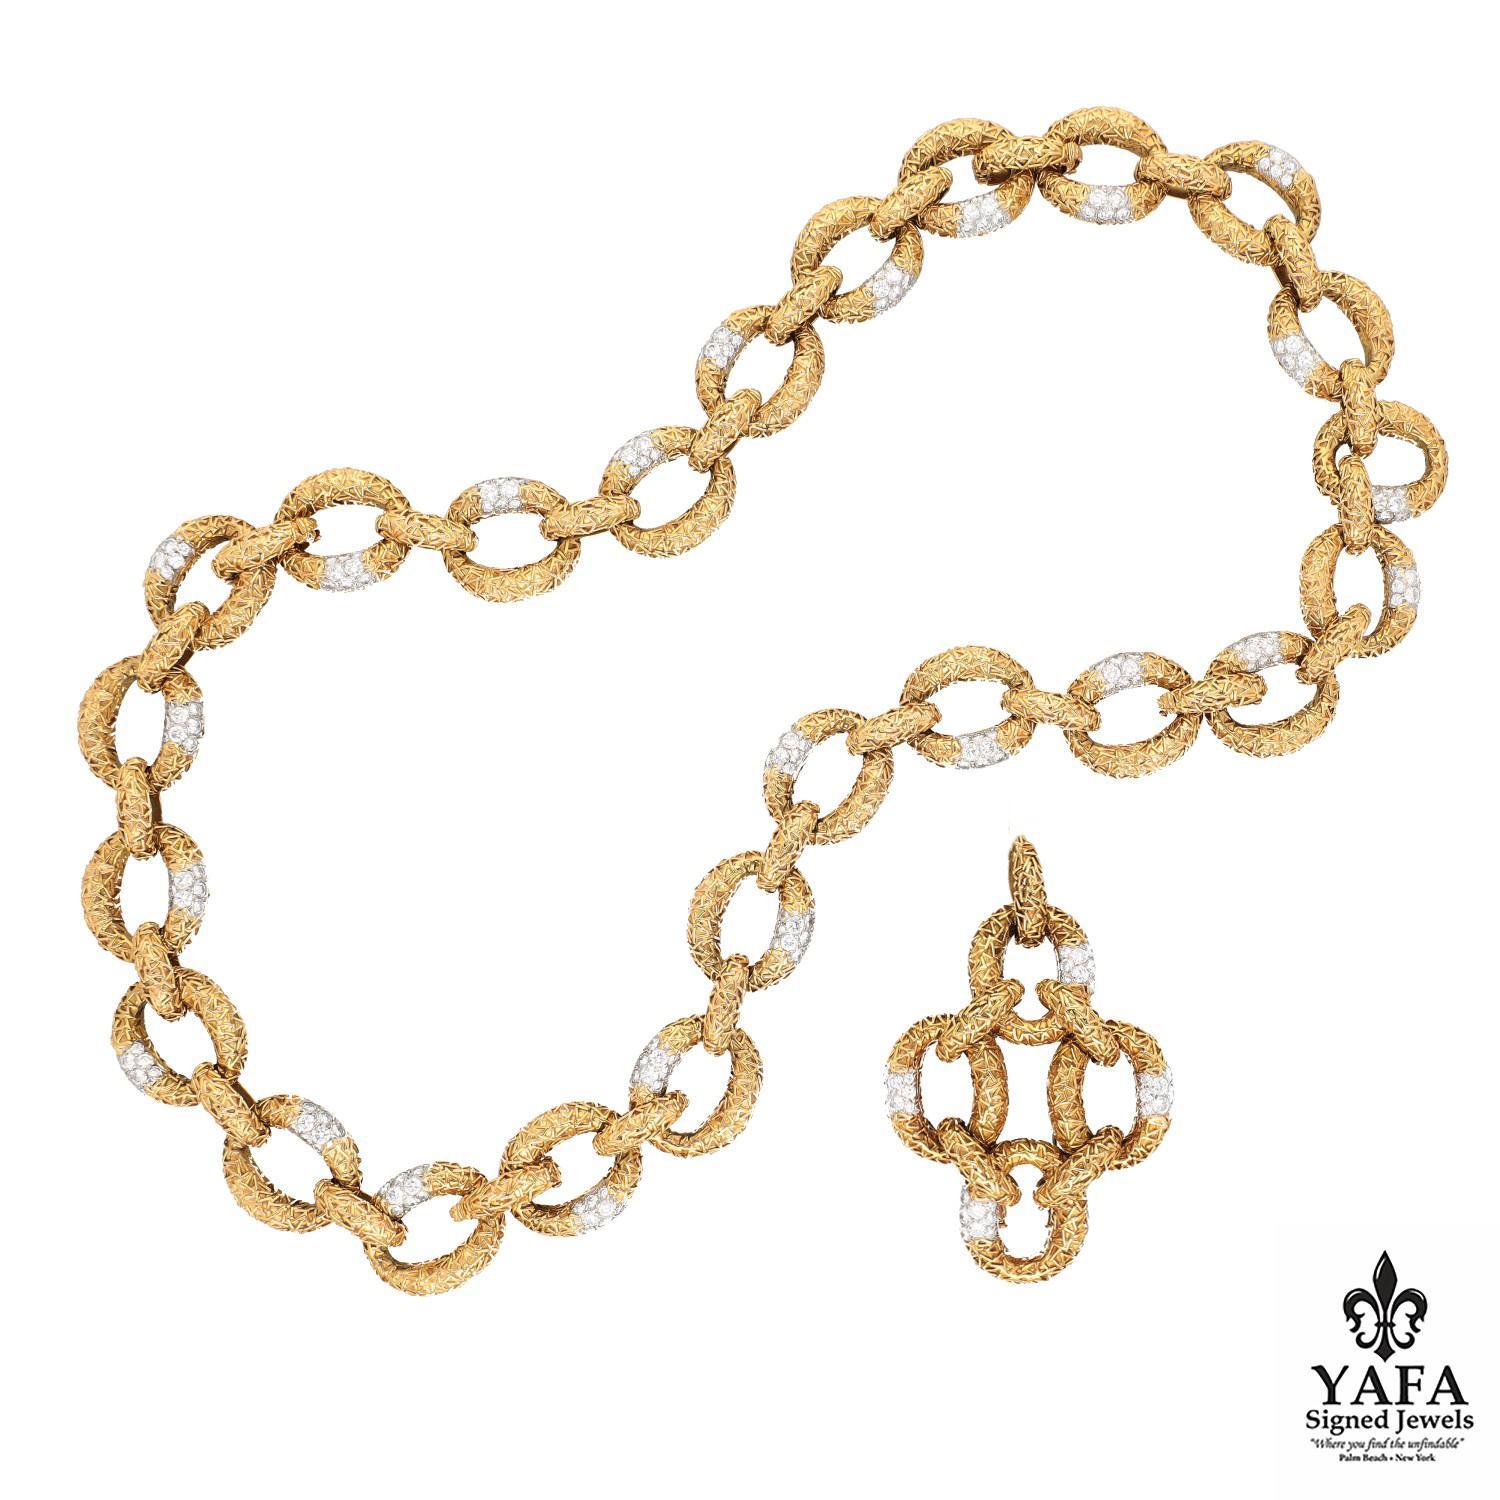 Van Cleef & Arpels Diamond Yellow Gold Necklace - Bracelet In Excellent Condition For Sale In New York, NY